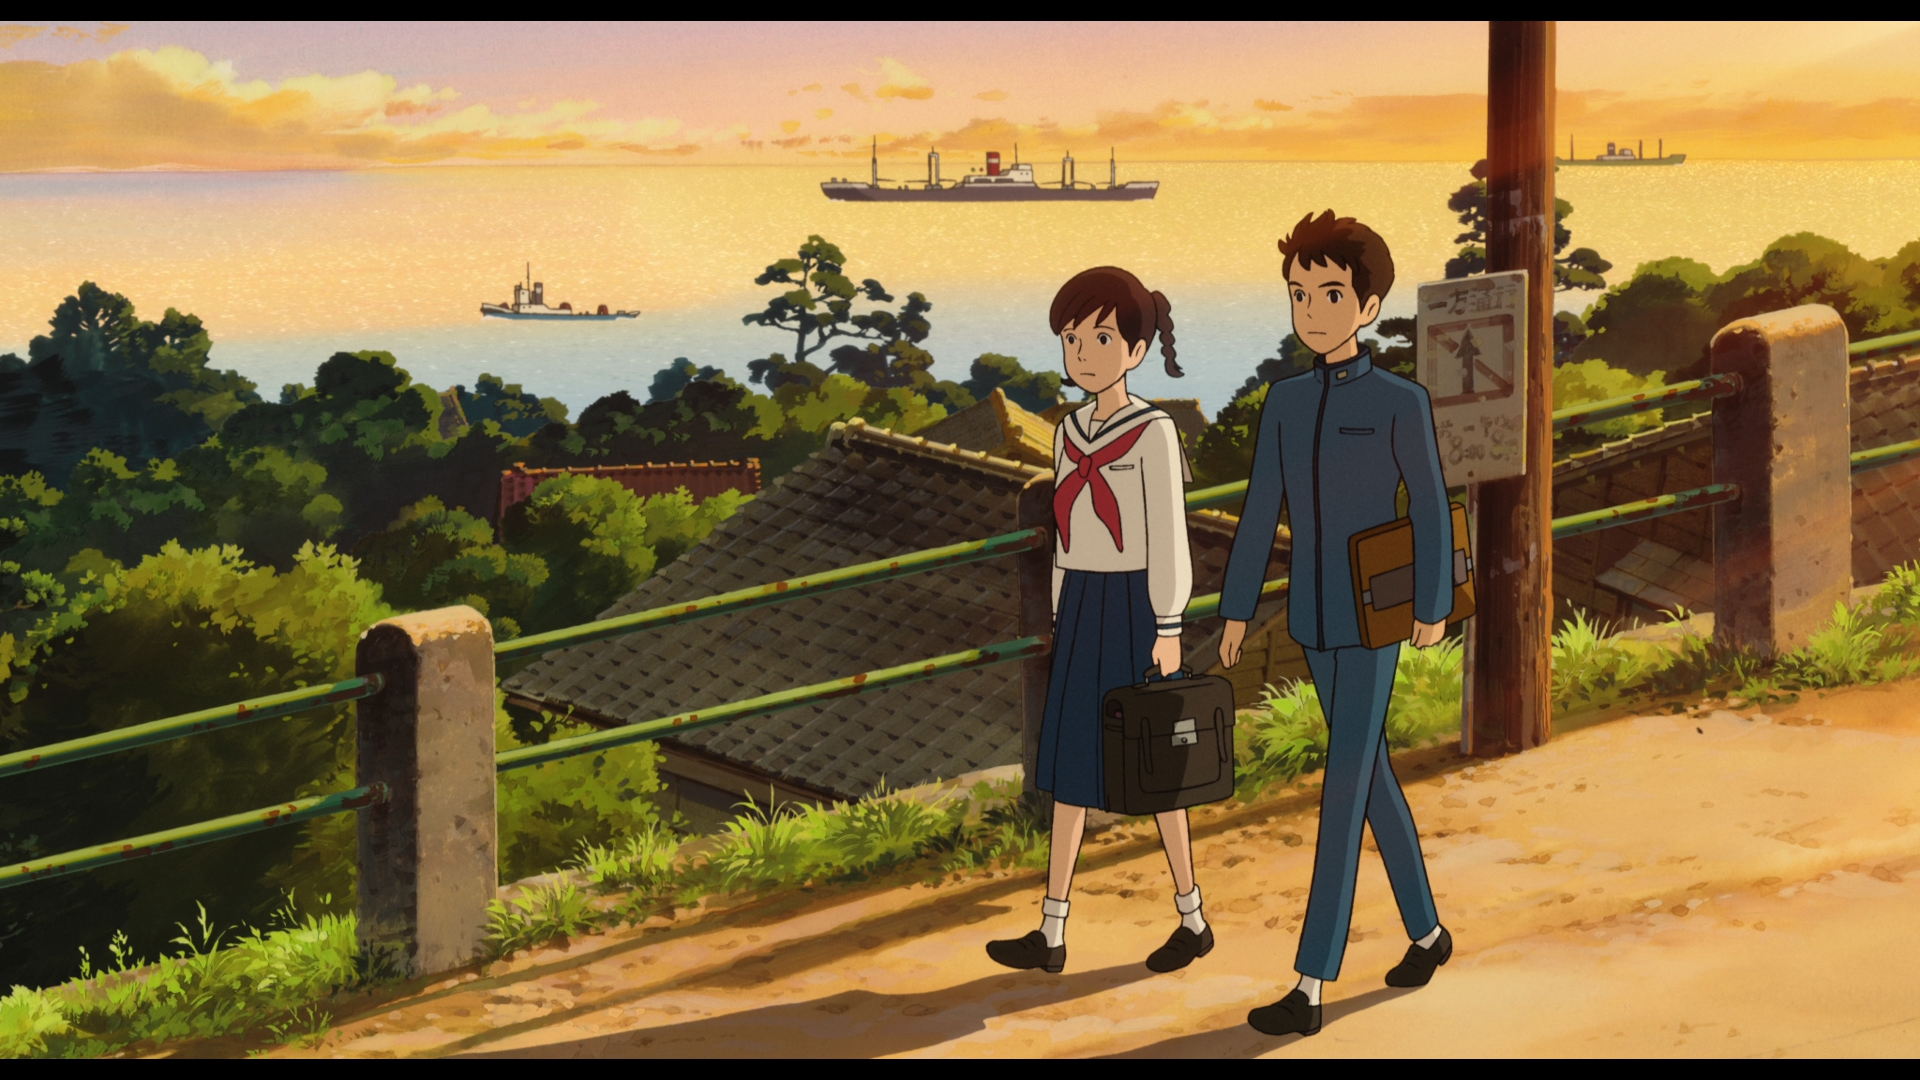 Umi and Shun walking home from school Up on Poppy Hill